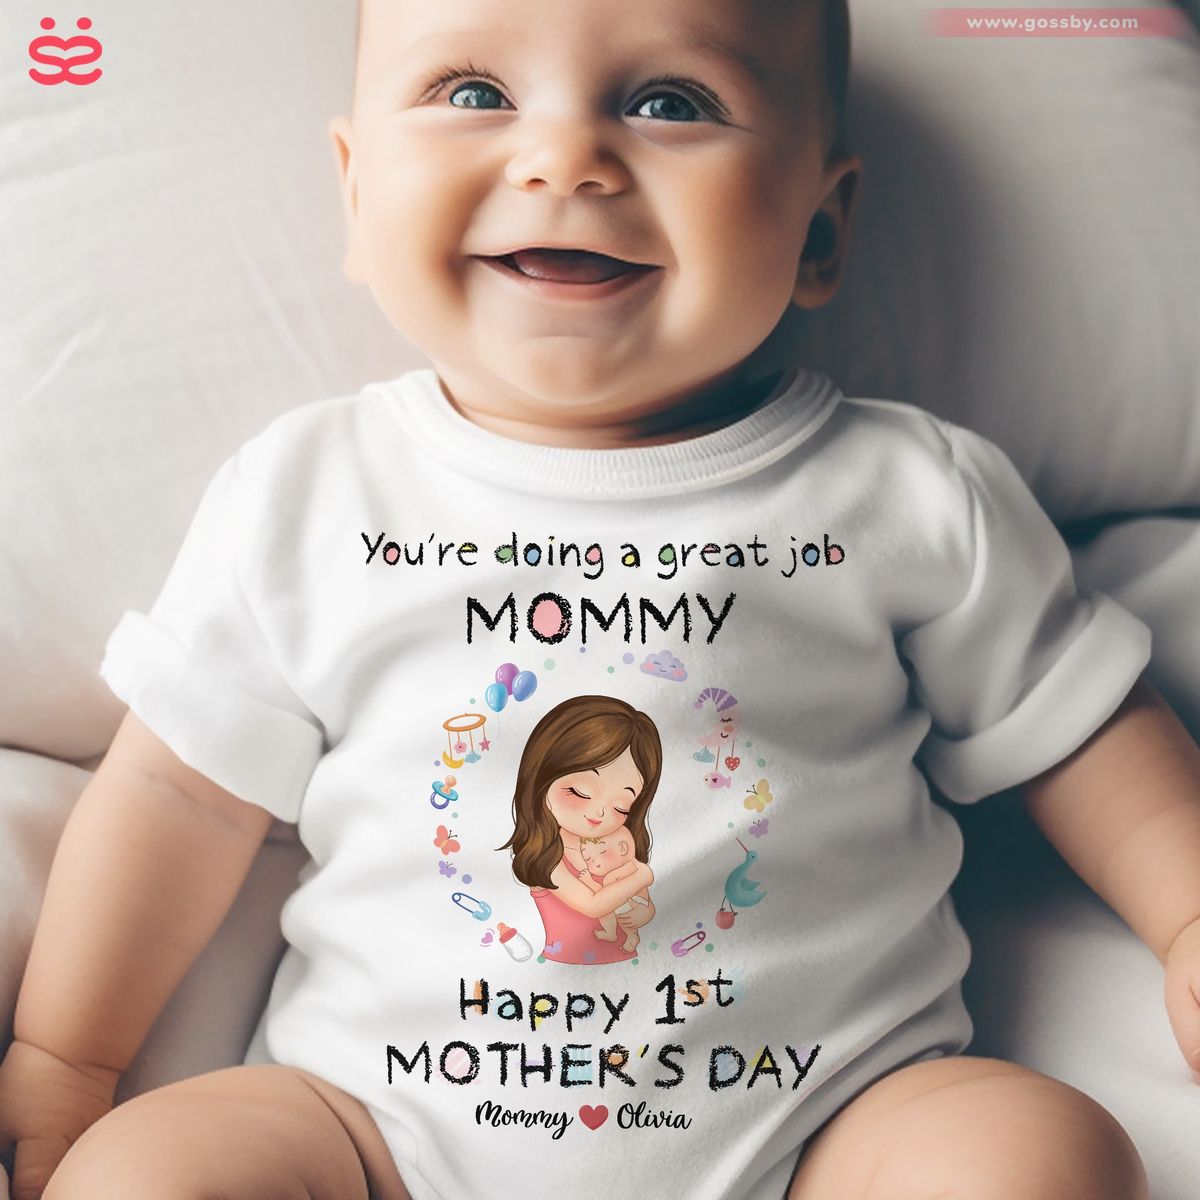 Custom Baby Onesies - You're doing a great job mommy Happy our 1st Mother's Day (ver 3) - Personalized Shirt_1